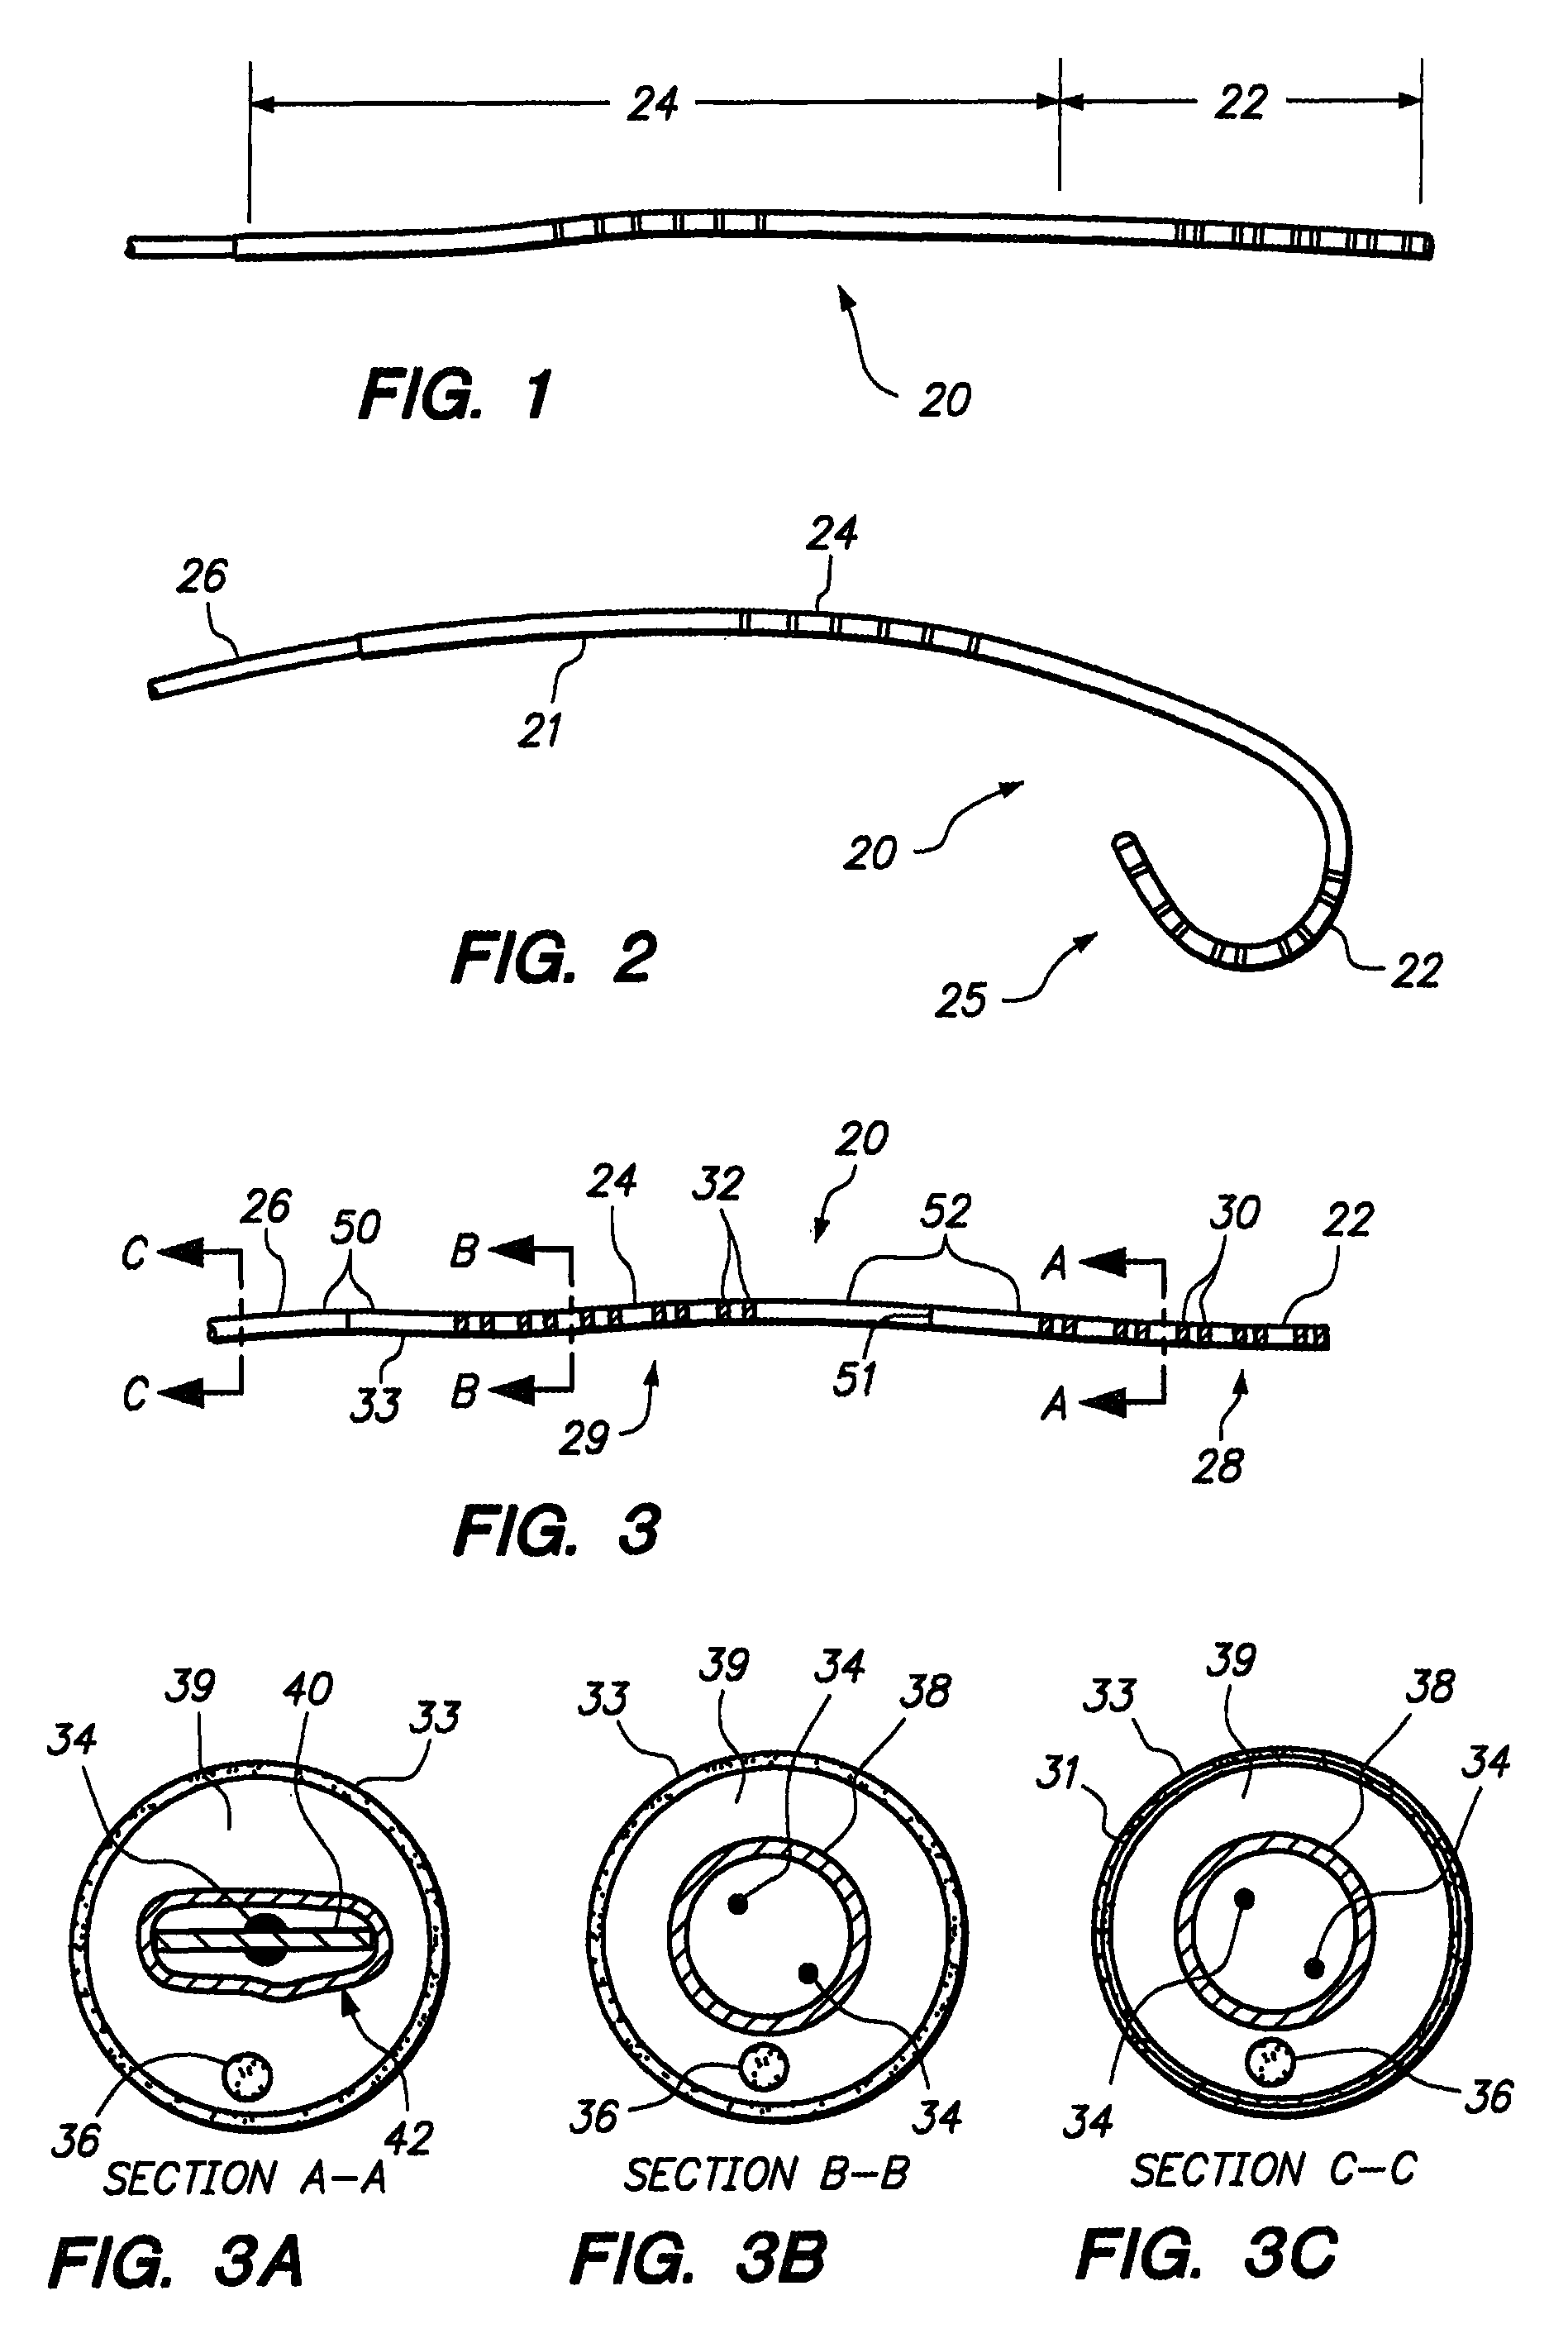 Multi-bend steerable mapping catheter